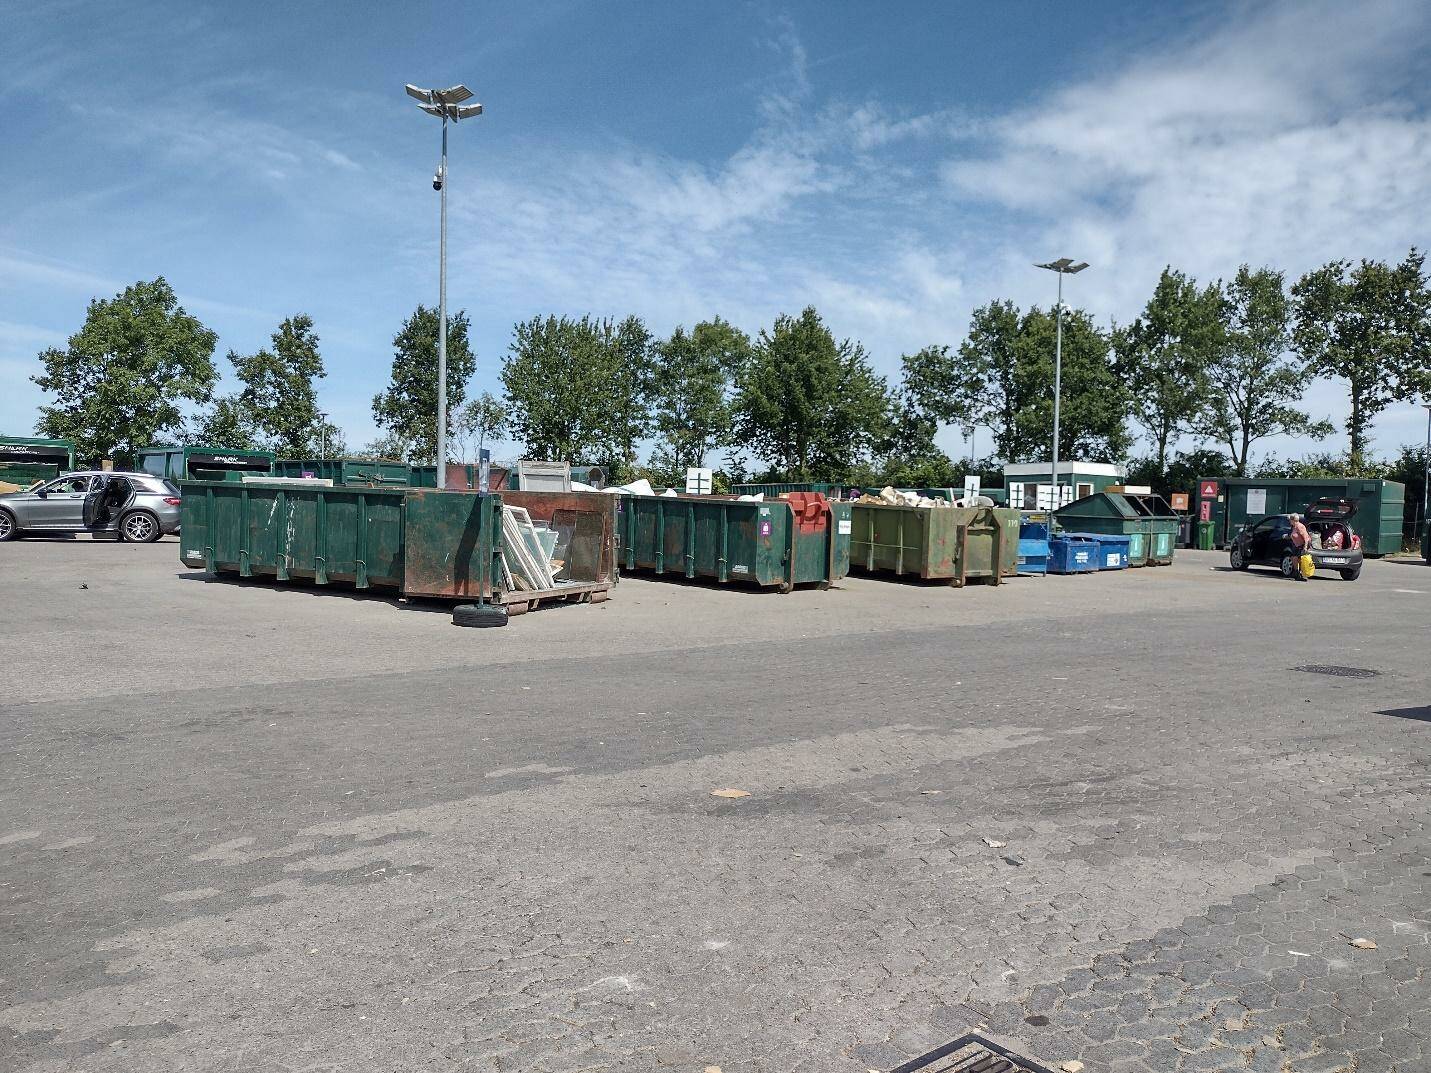 Ross MacDonald/Contributed photo
The main recycling center at BOFA on the island of Bornholm in Denmark. Customers drive into the site to separate and unload their materials. August 2022